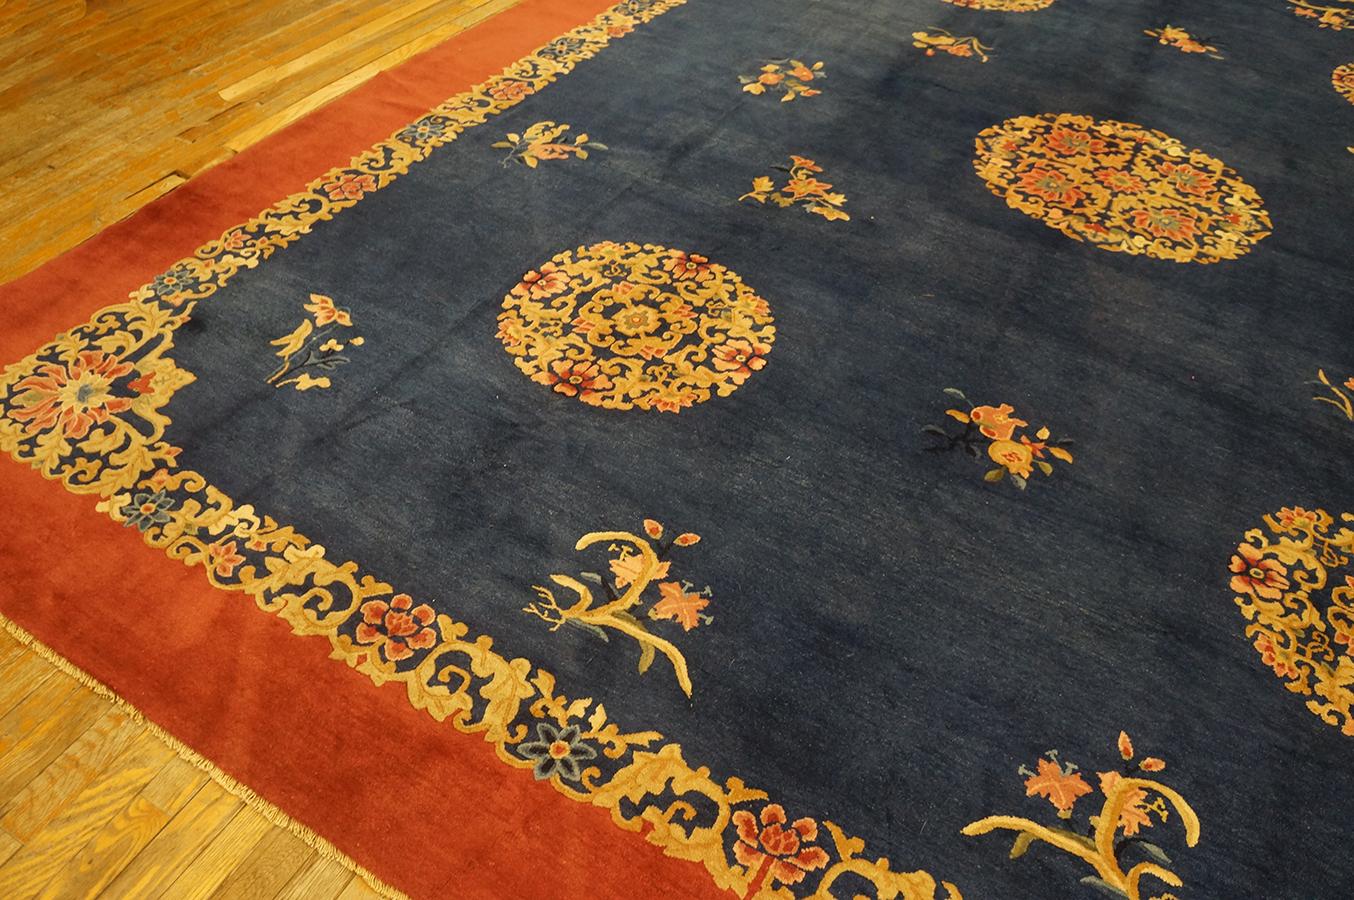 Early 20th Century Chinese Peking Carpet ( 11' x 13'6'' - 335 x 412 ) For Sale 6